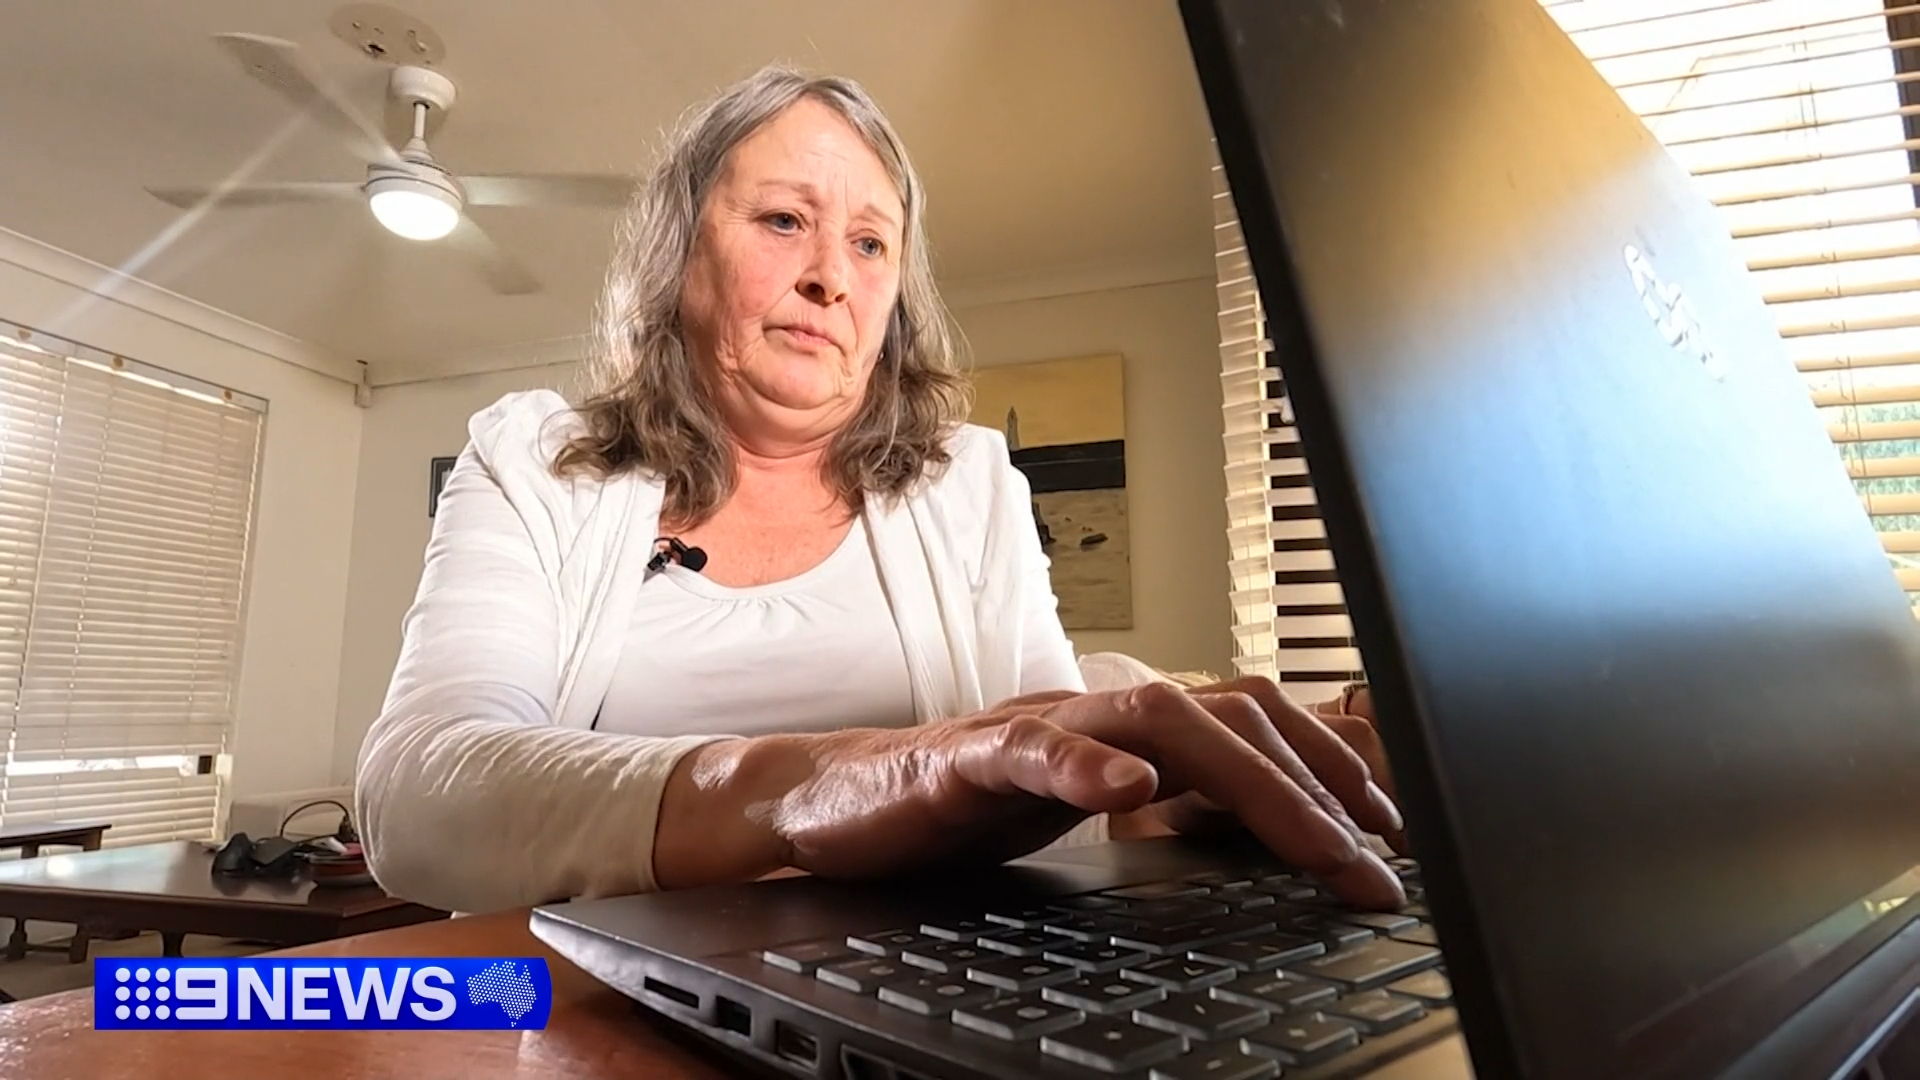 Perth gran scammed out of $10,000 over Facebook